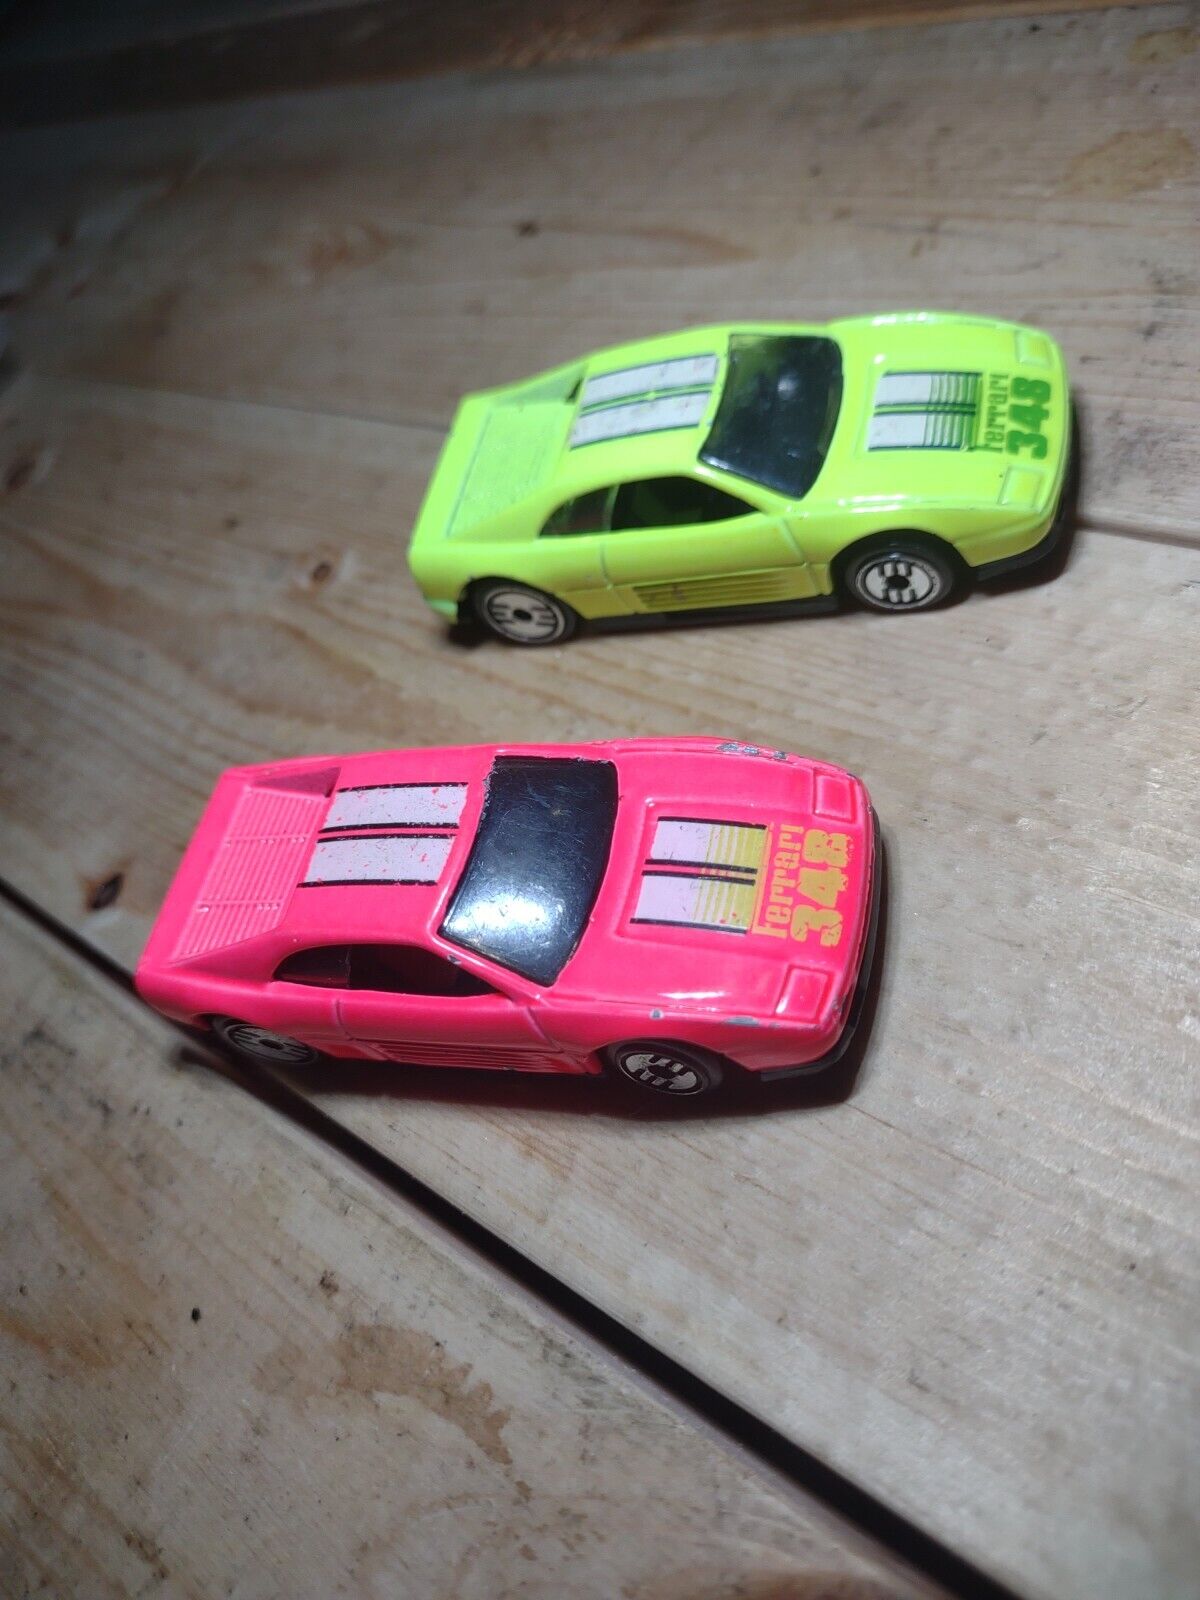 Hot Wheels Ferrari 348 Highlighter Yellow And Pink Set Of Two 1990